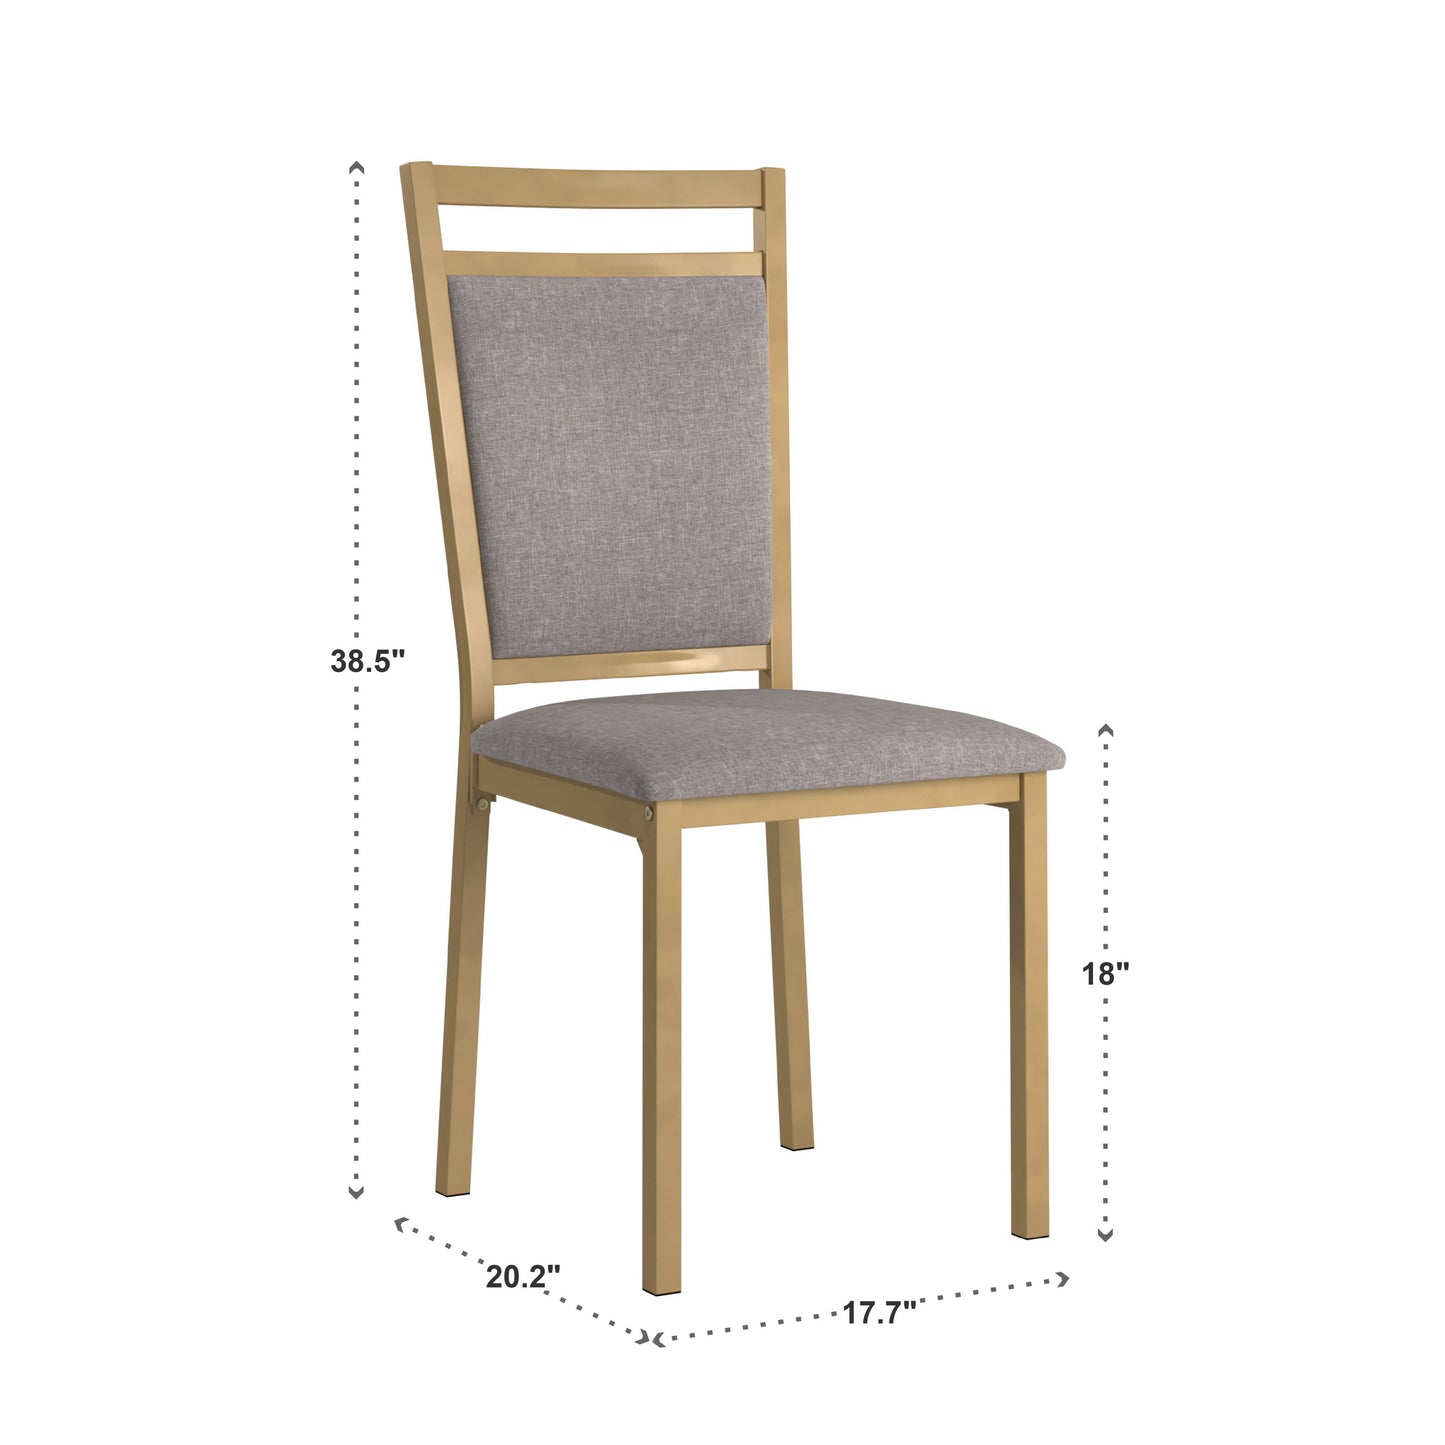 Metal Upholstered Dining Chairs - Grey Linen, Set of 4